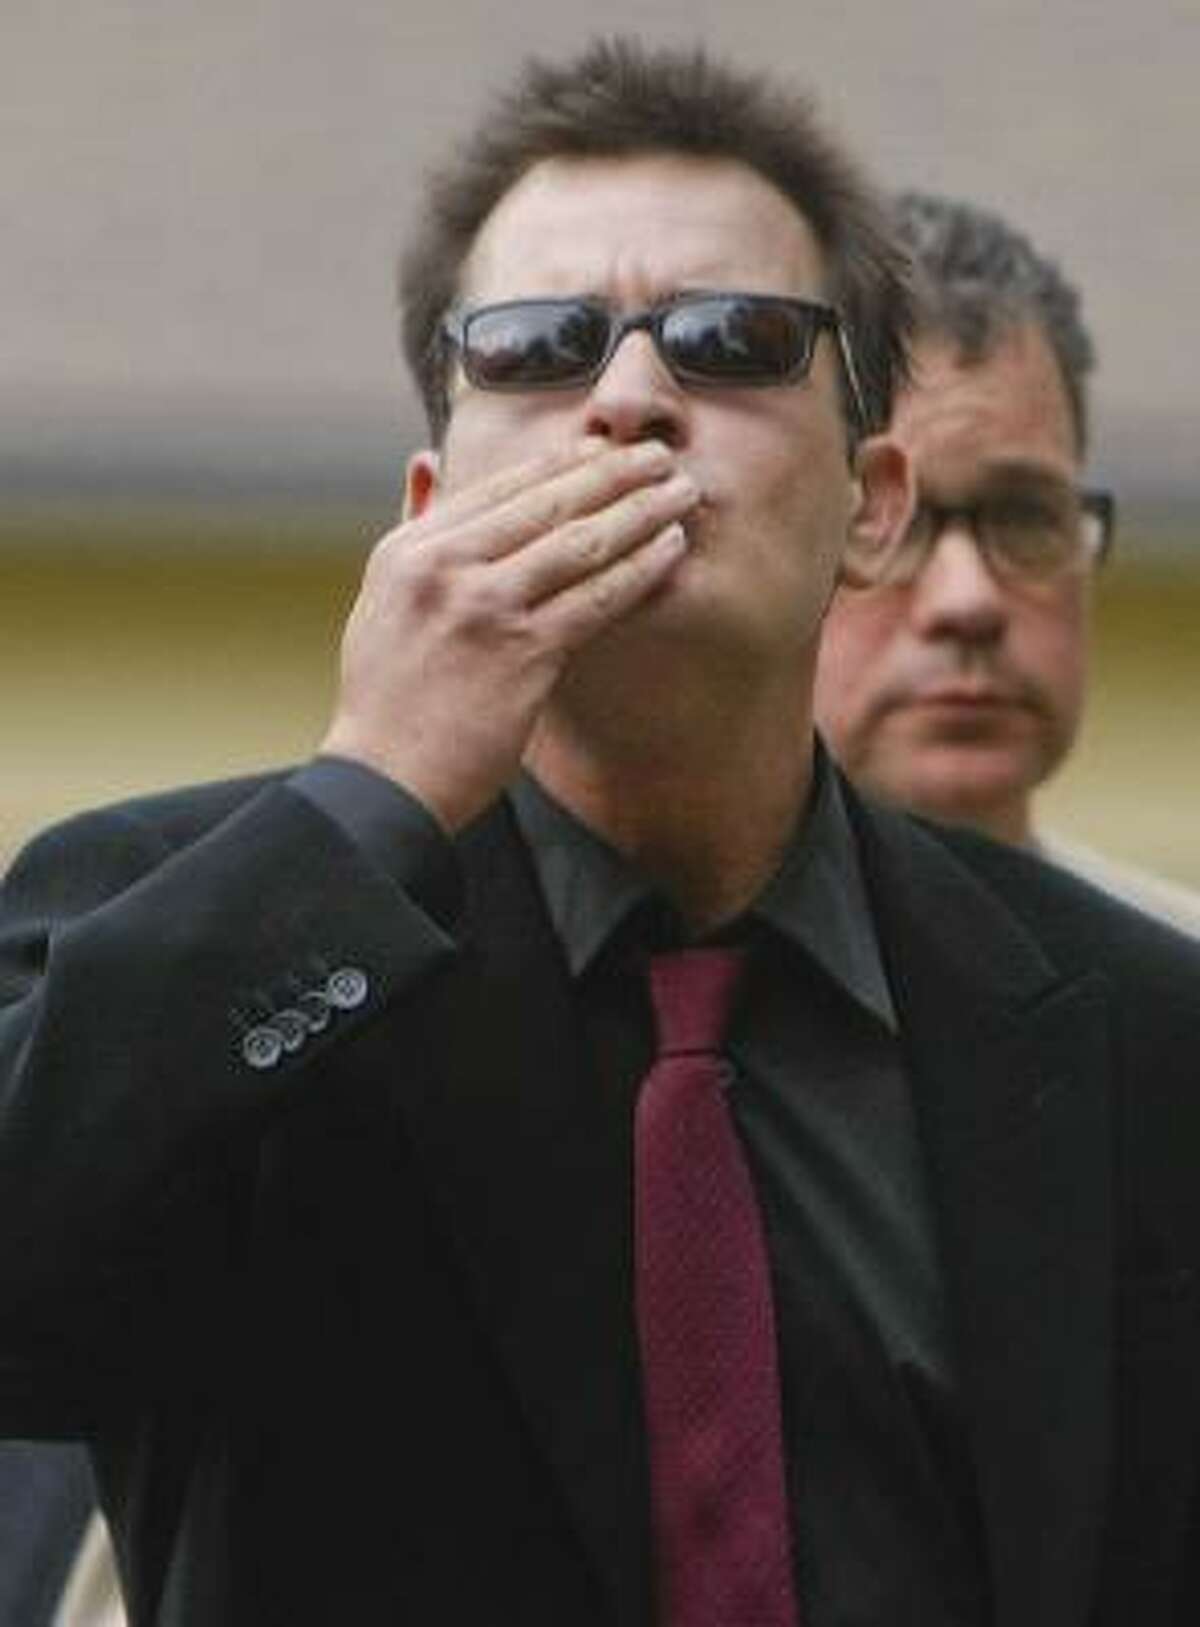 "Winner!" Charlie Sheen recently lost his job as star on Two and a Half Men due to his recent antics. Those "antics" include trashing a hotel room, various porn star friends, alleged suitcases of cocaine and public rants online and on radio.